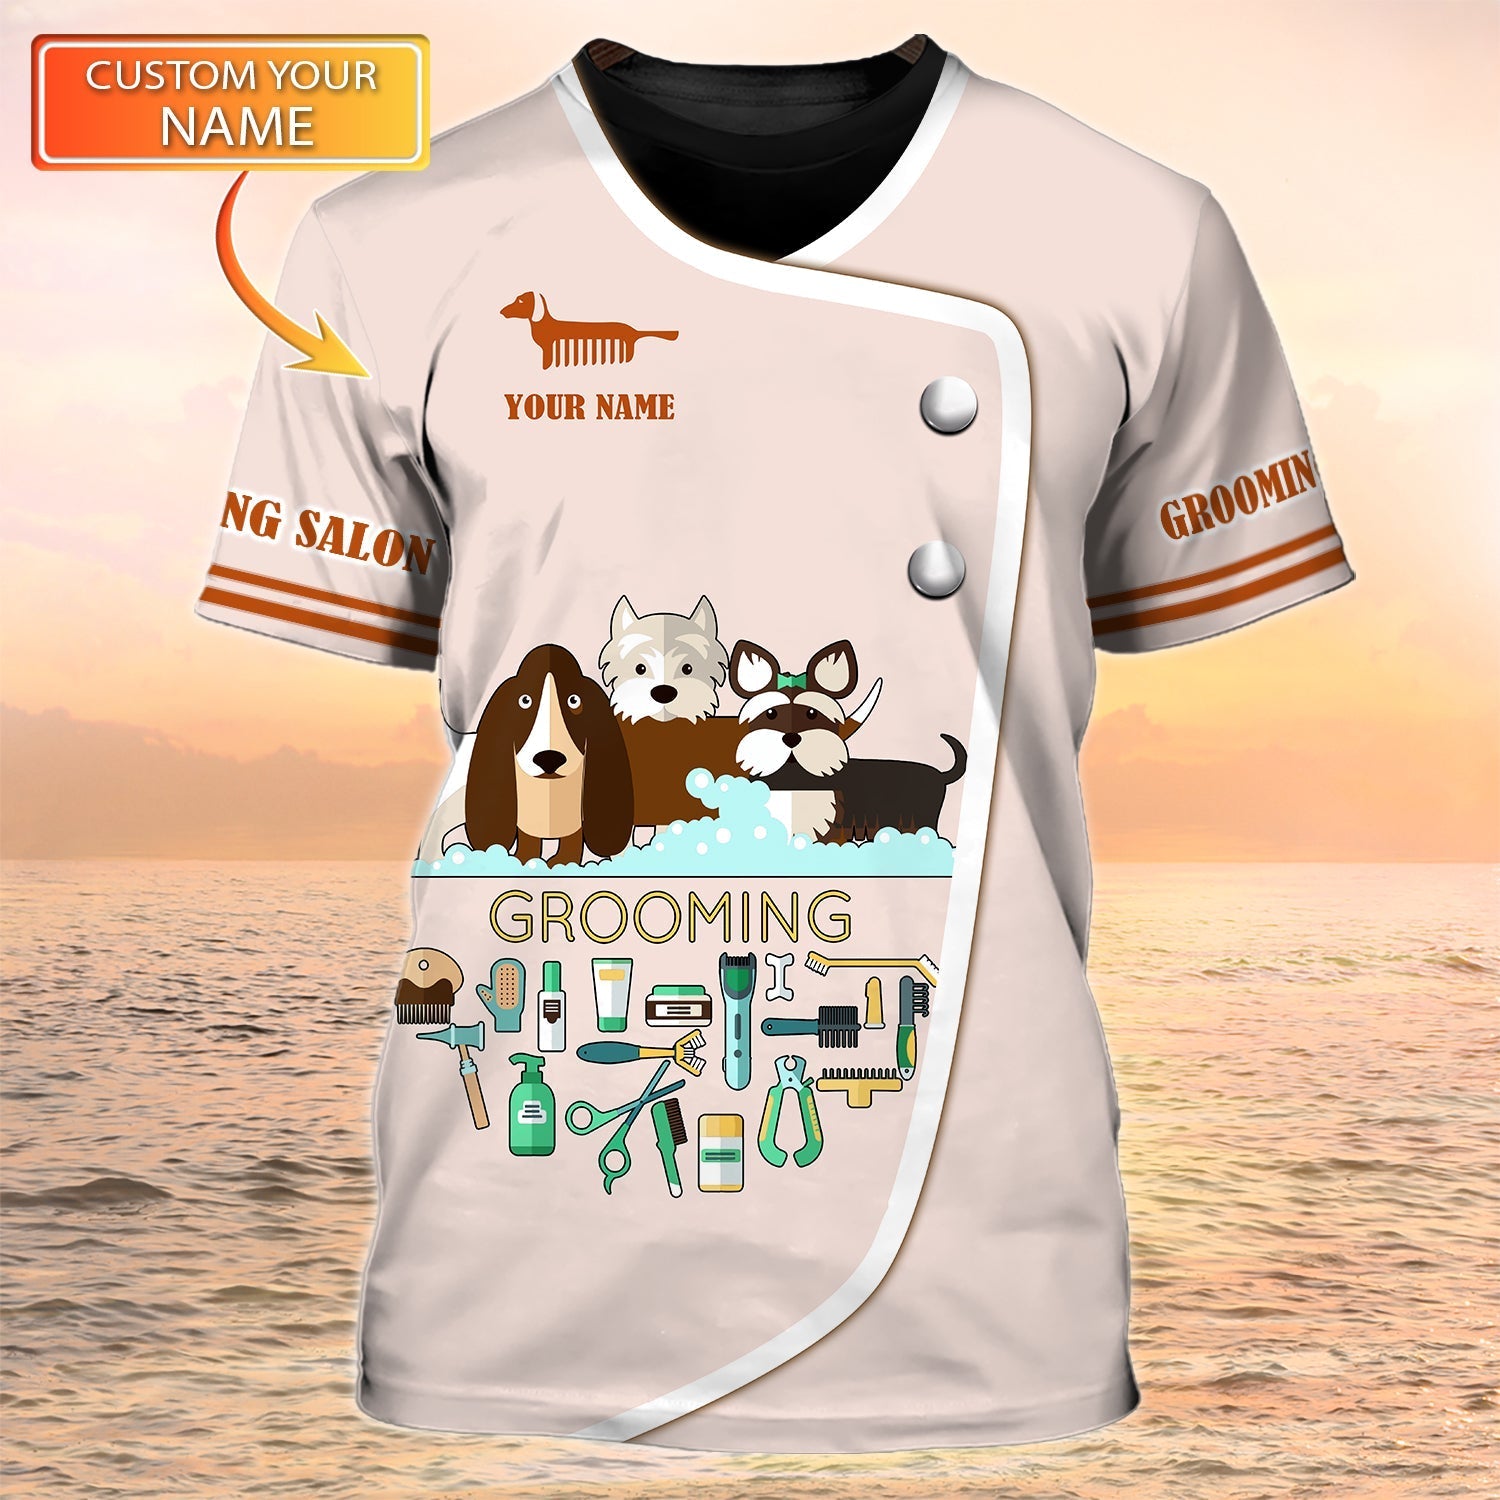 Personalized Name 3D Tshirt For A Dog Groomer Grooming Salon Dog Groomer Uniform